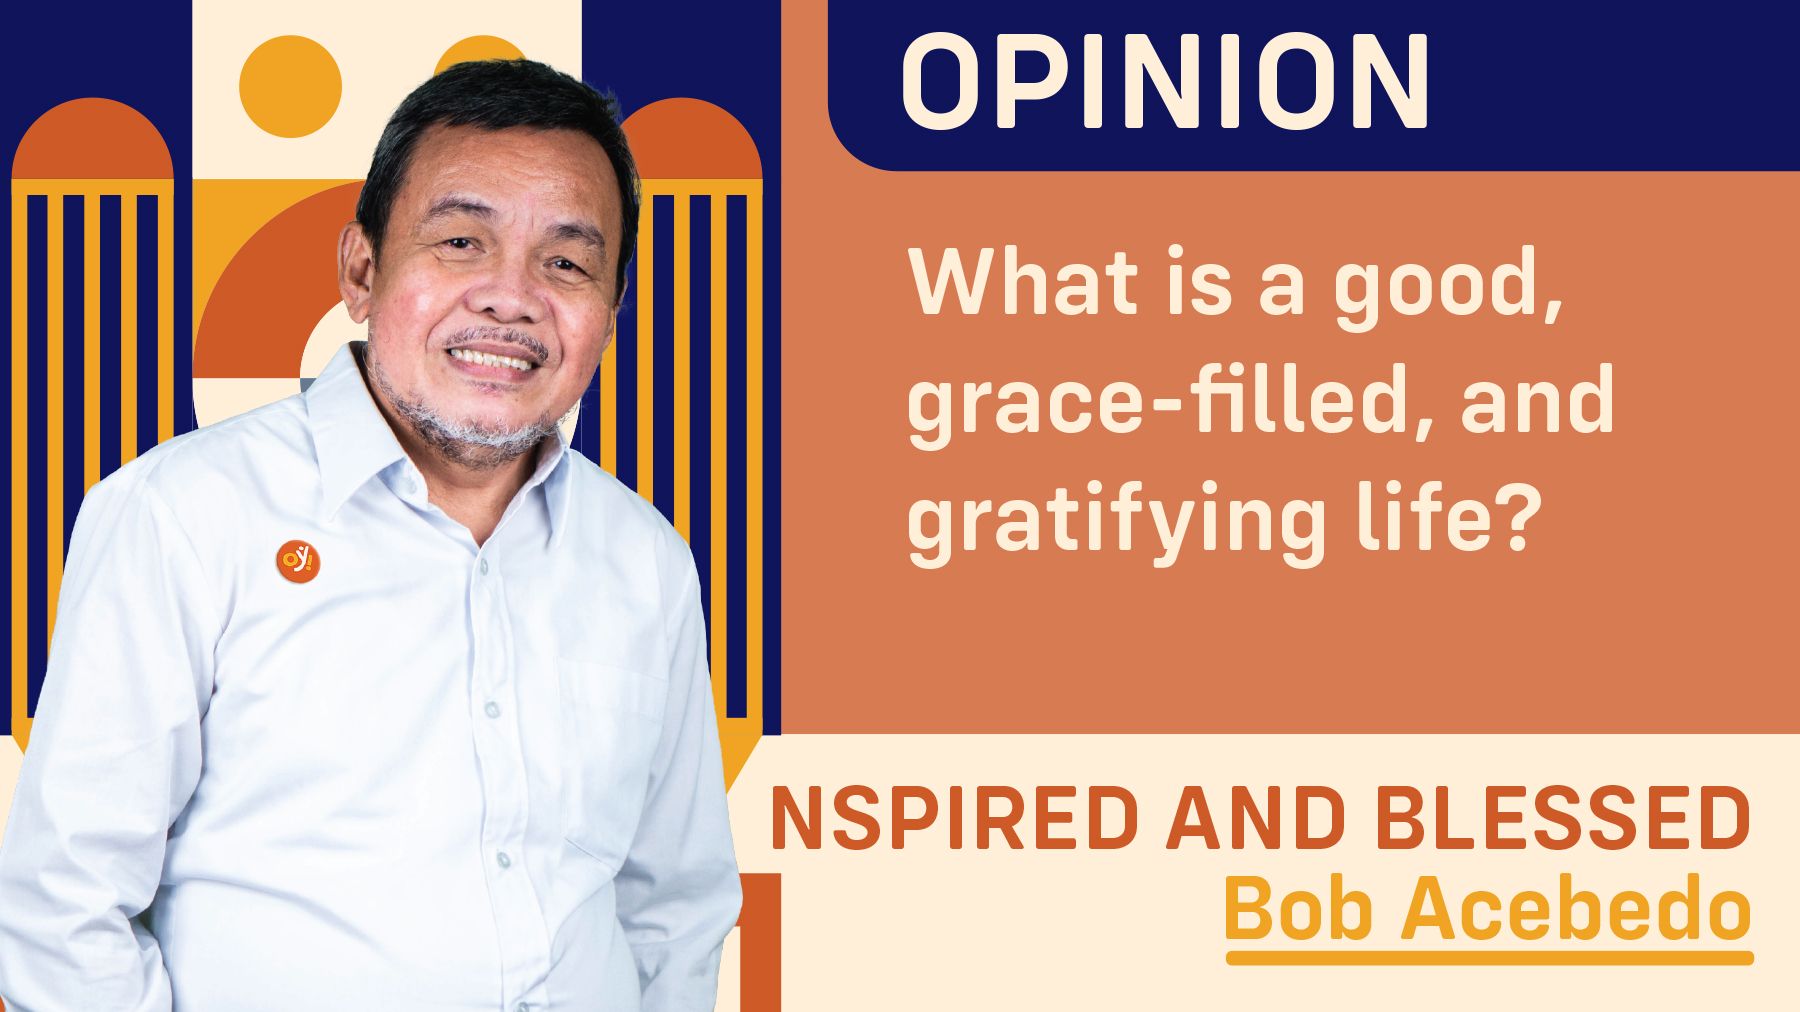 What is a good, grace-filled, and gratifying life?